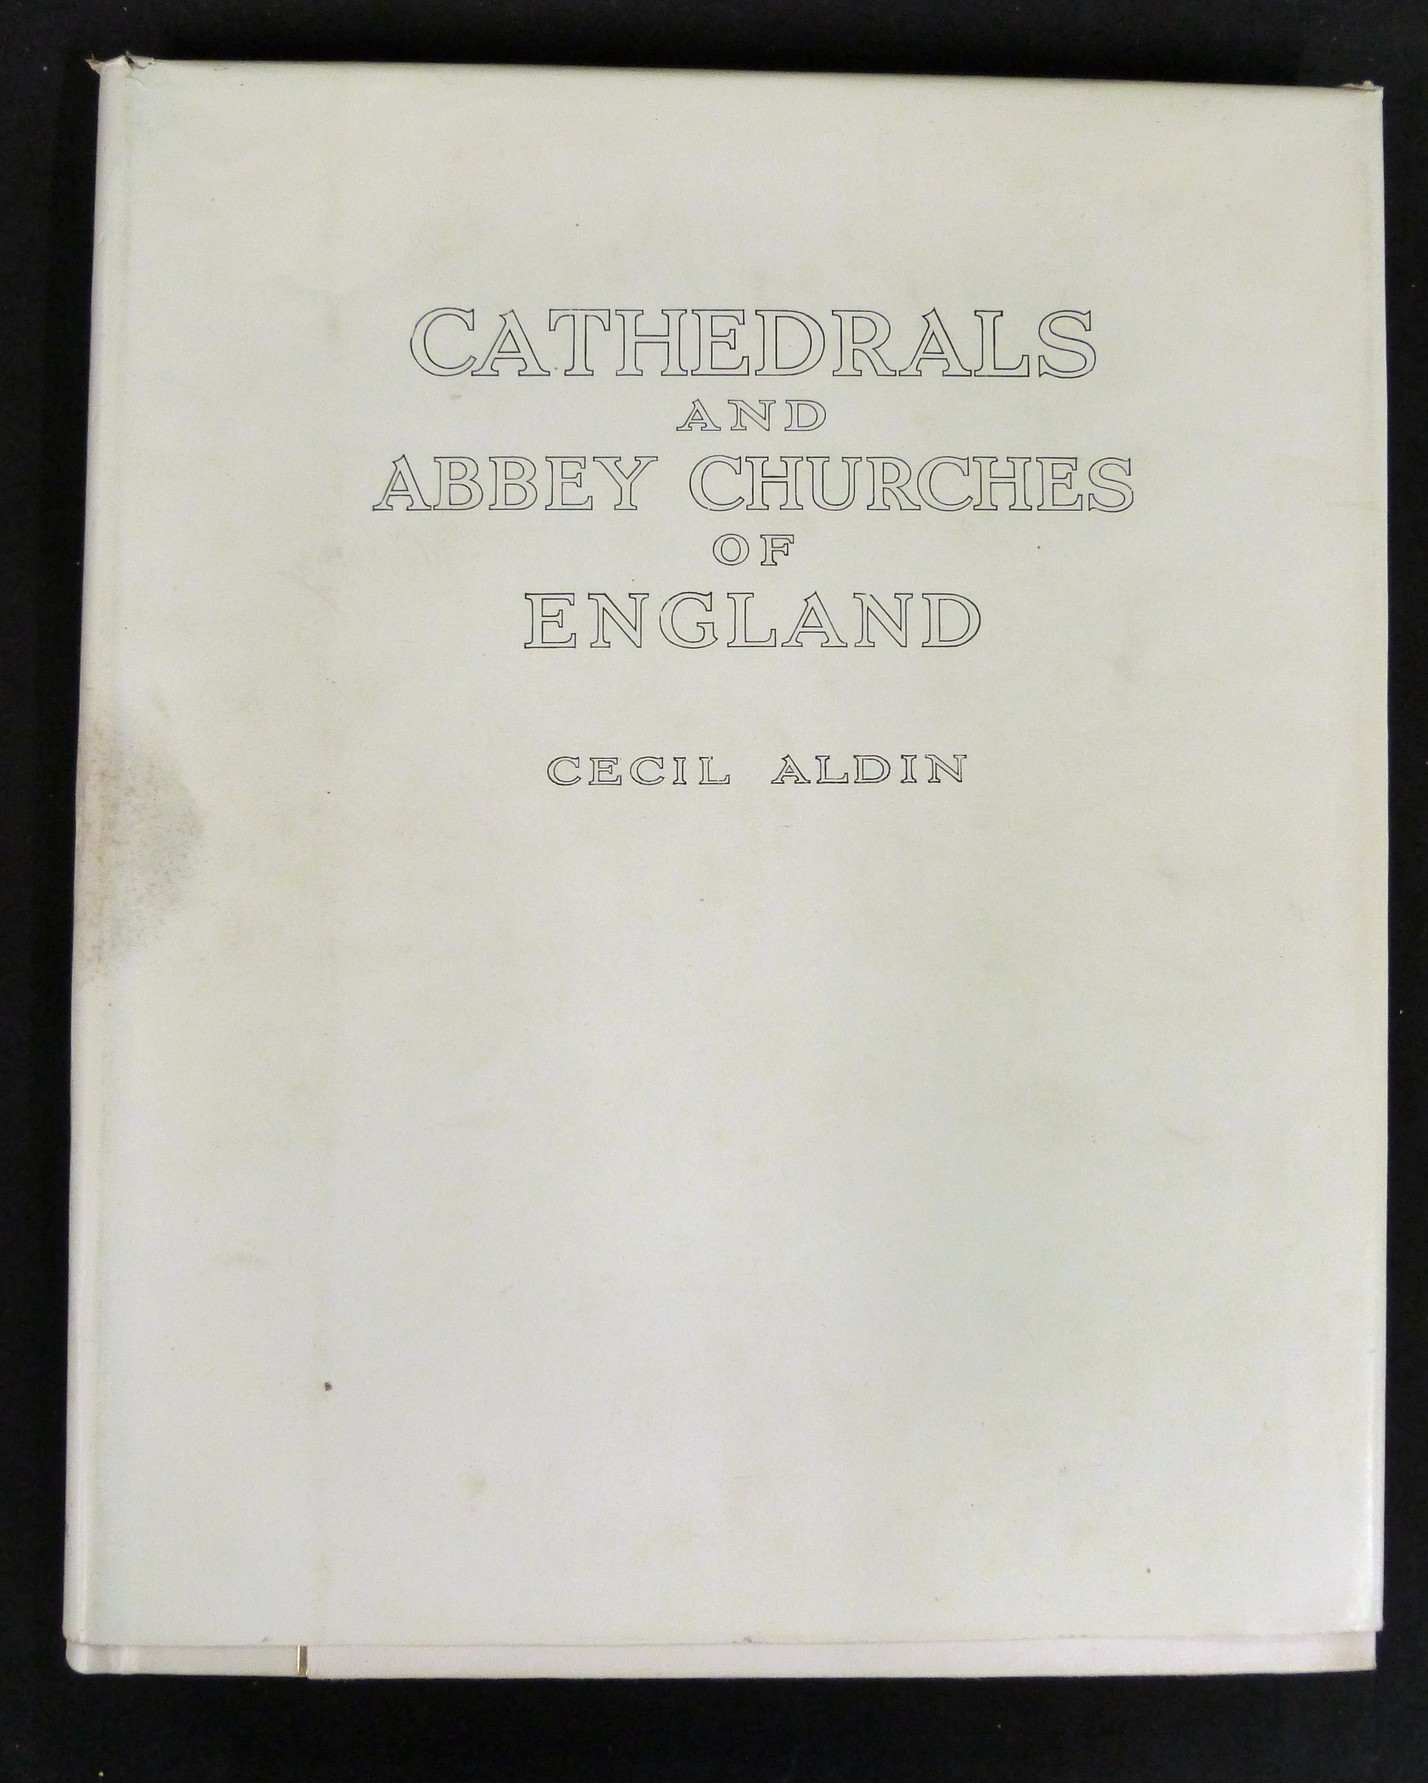 CECIL ALDIN: CATHEDRALS OF ENGLAND, London, Eyre & Spottiswoode [1924] (375) (350) numbered (120)